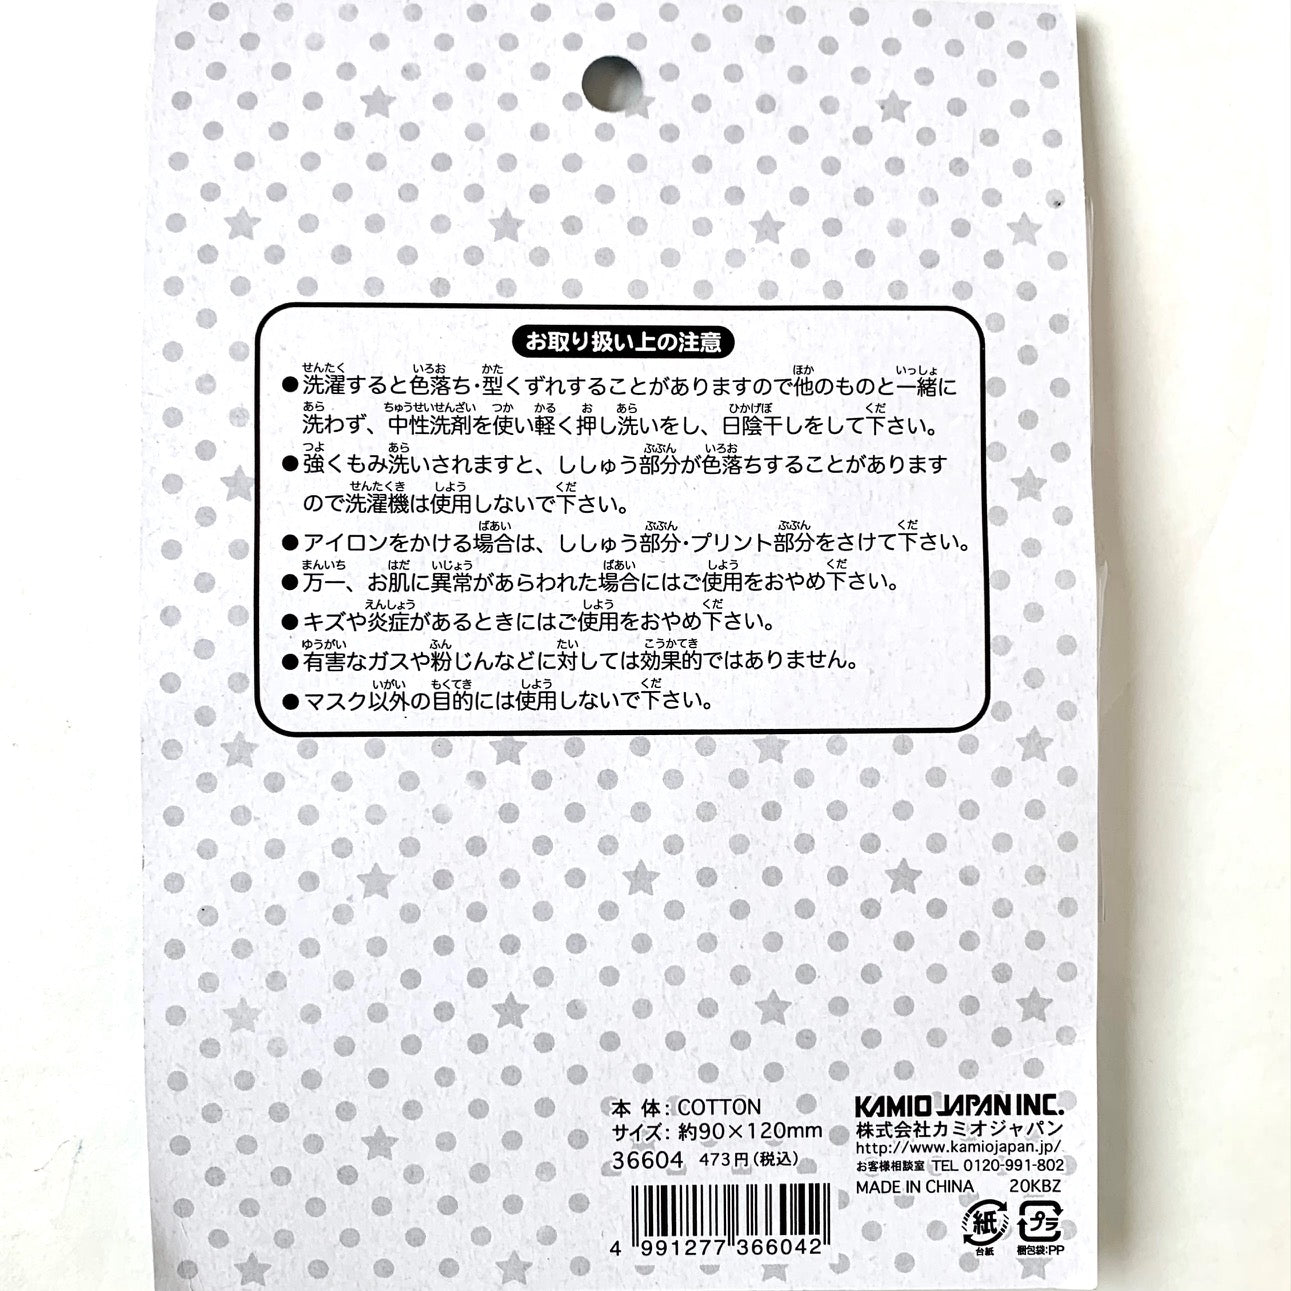 X 366042 Kamio Cherry/Soda 2 Pack Face Masks-DISCONTINUED